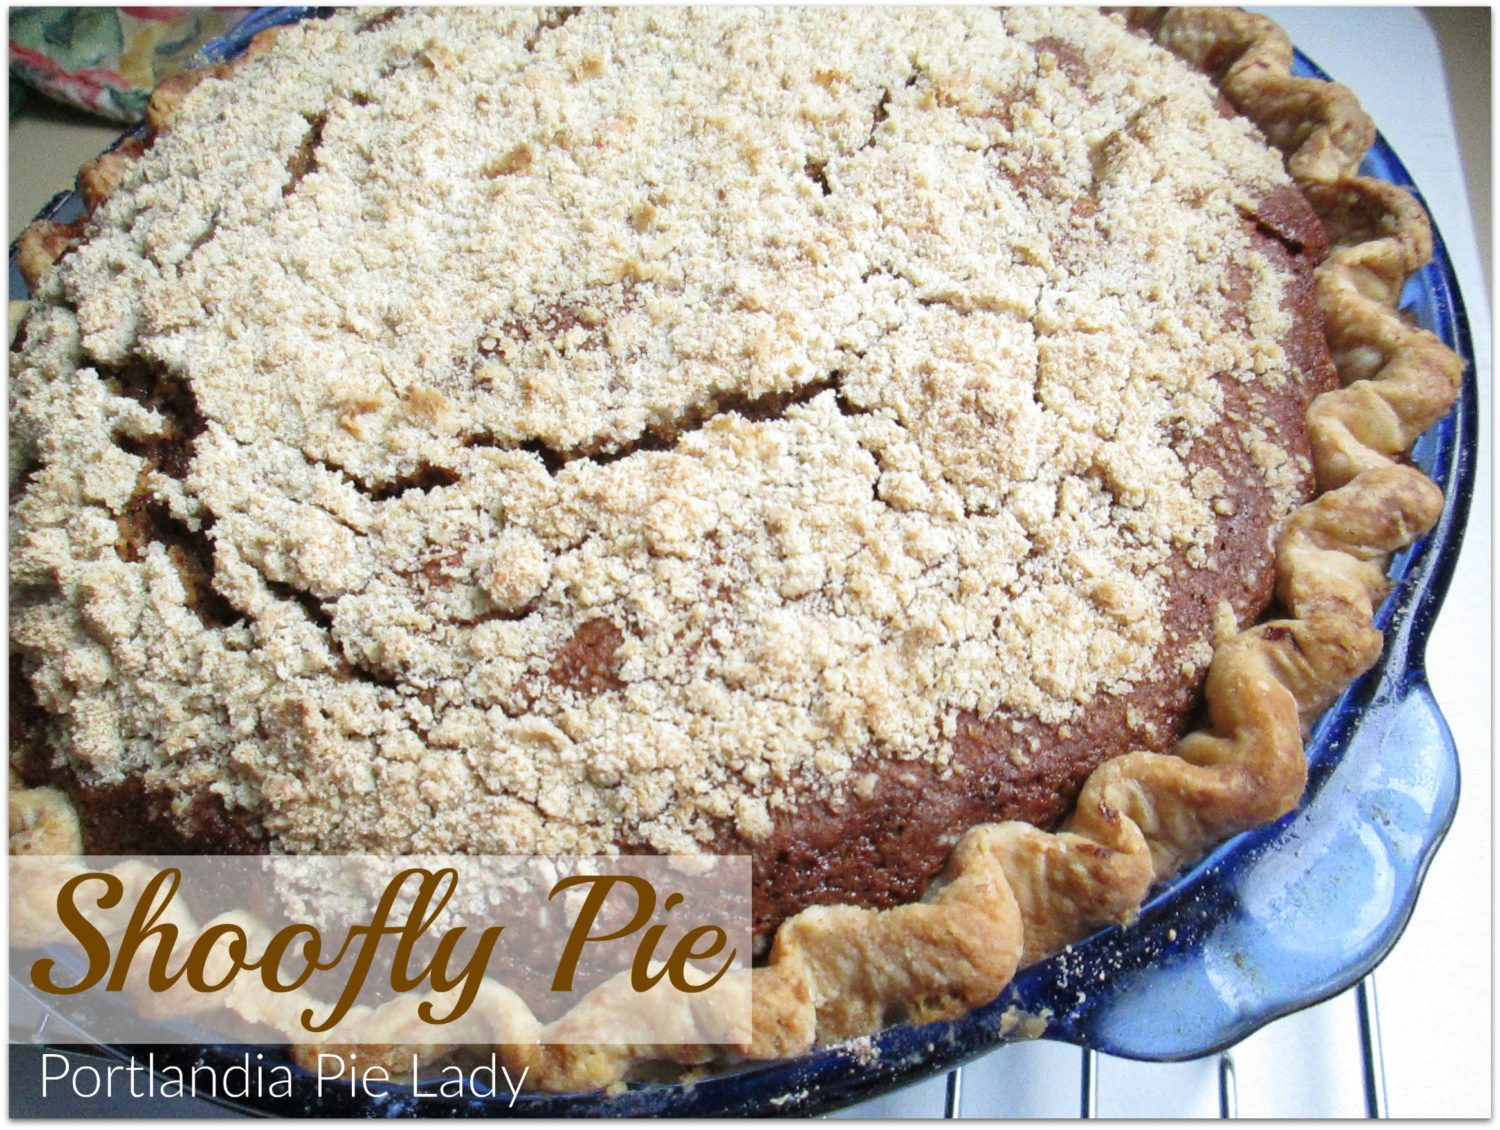 Shoofly Pie: Sweet dark molasses filling baked in a buttery crust. This is an Mennonite inspired pie, enjoy it a la mode as you shoo those flies away.